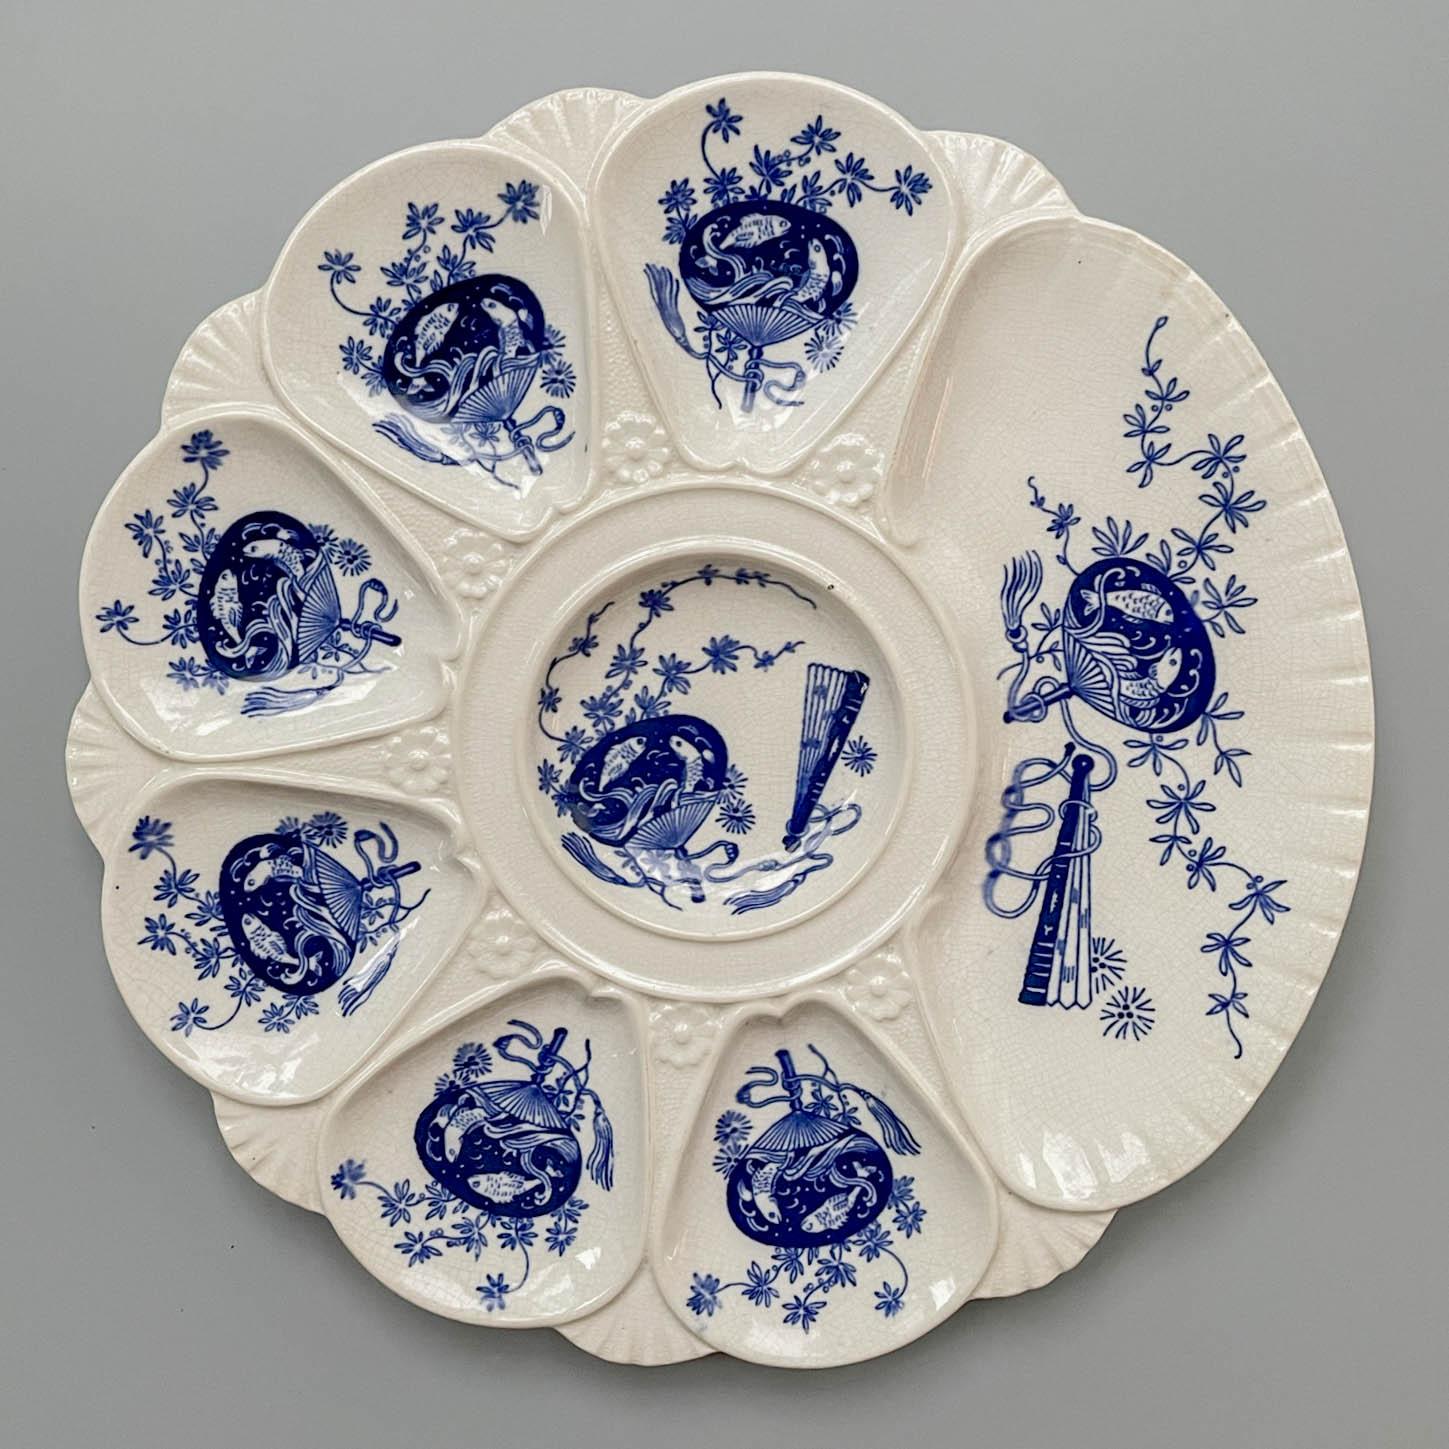 A Victorian Minton flow blue porcelain oyster plate, with six oyster wells, a center well and a large well for crackers. Decorated in the Japonisme style, each well has indigo blue flowers and fans with koi fish and is separated by relief of shells